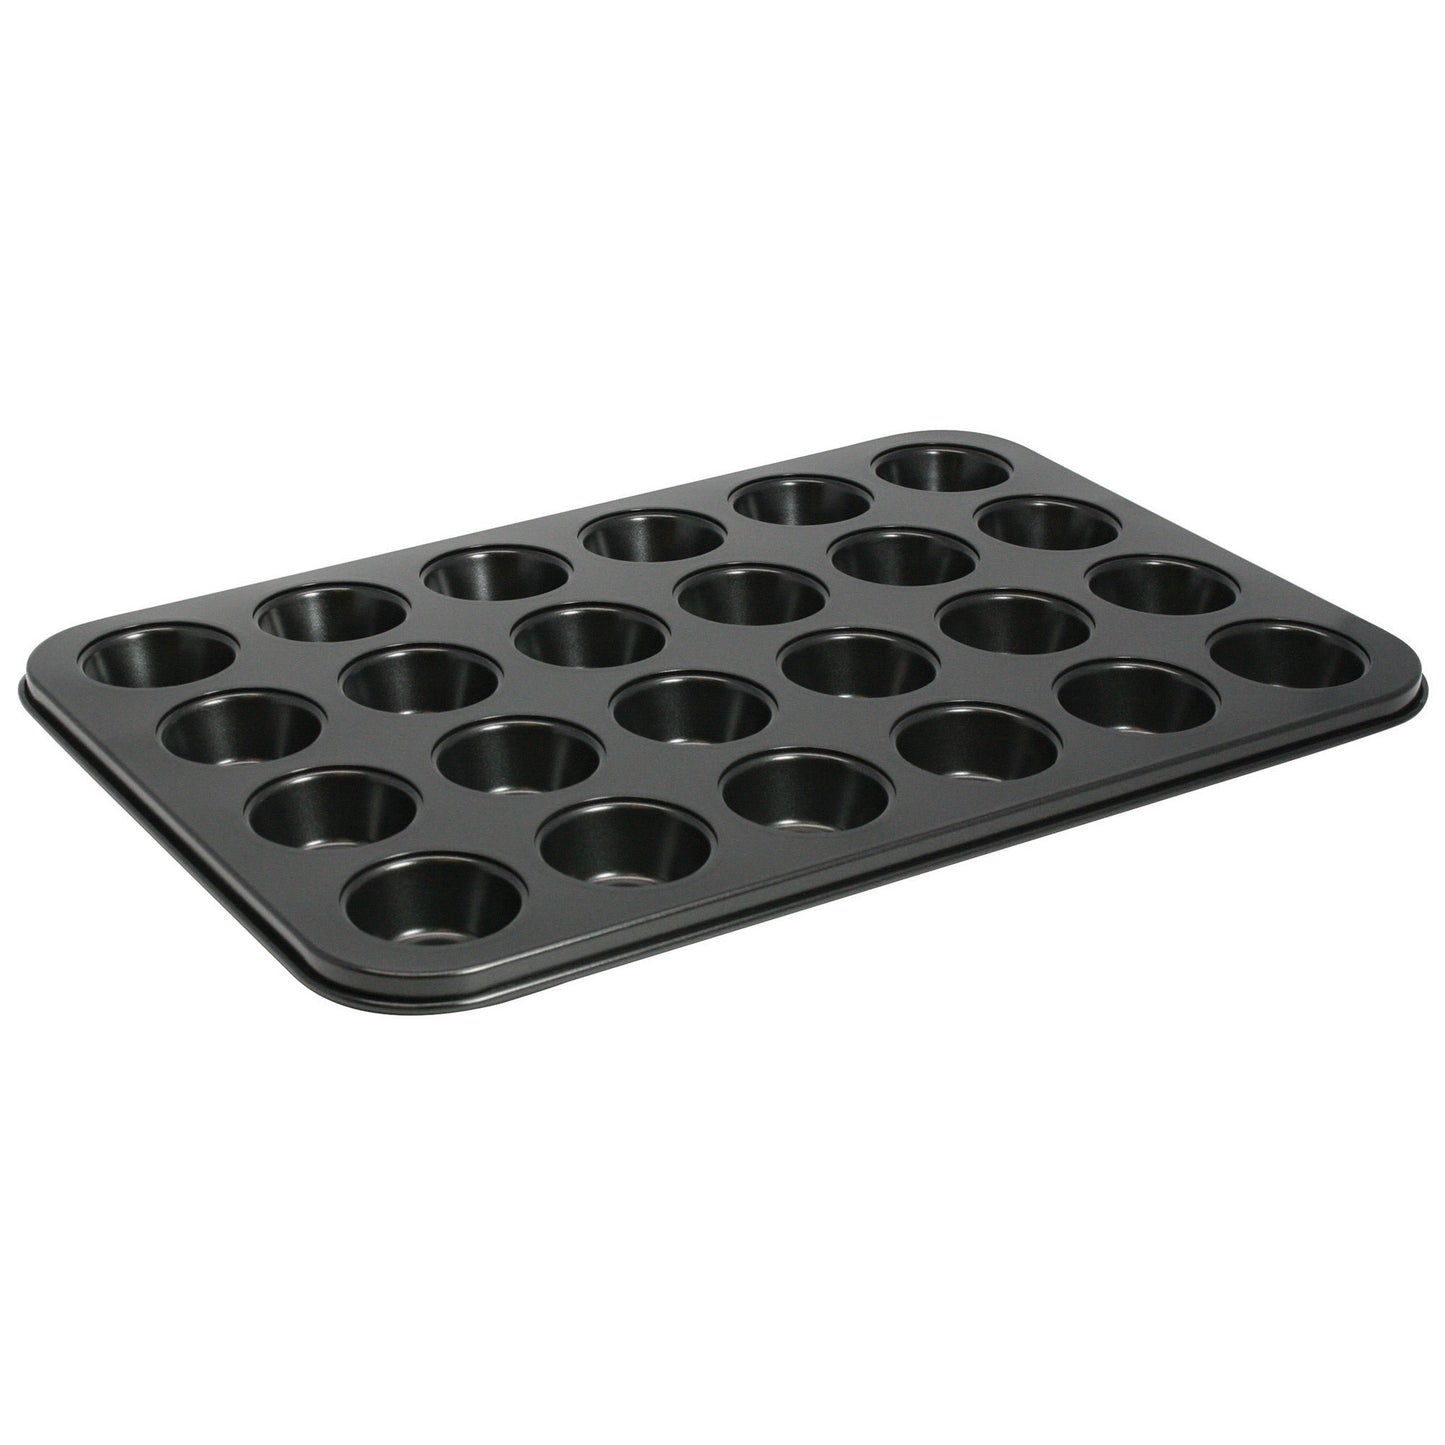 AMF-24MNS - 24-Cup Non-Stick Muffin Pan - 1-1/2 oz